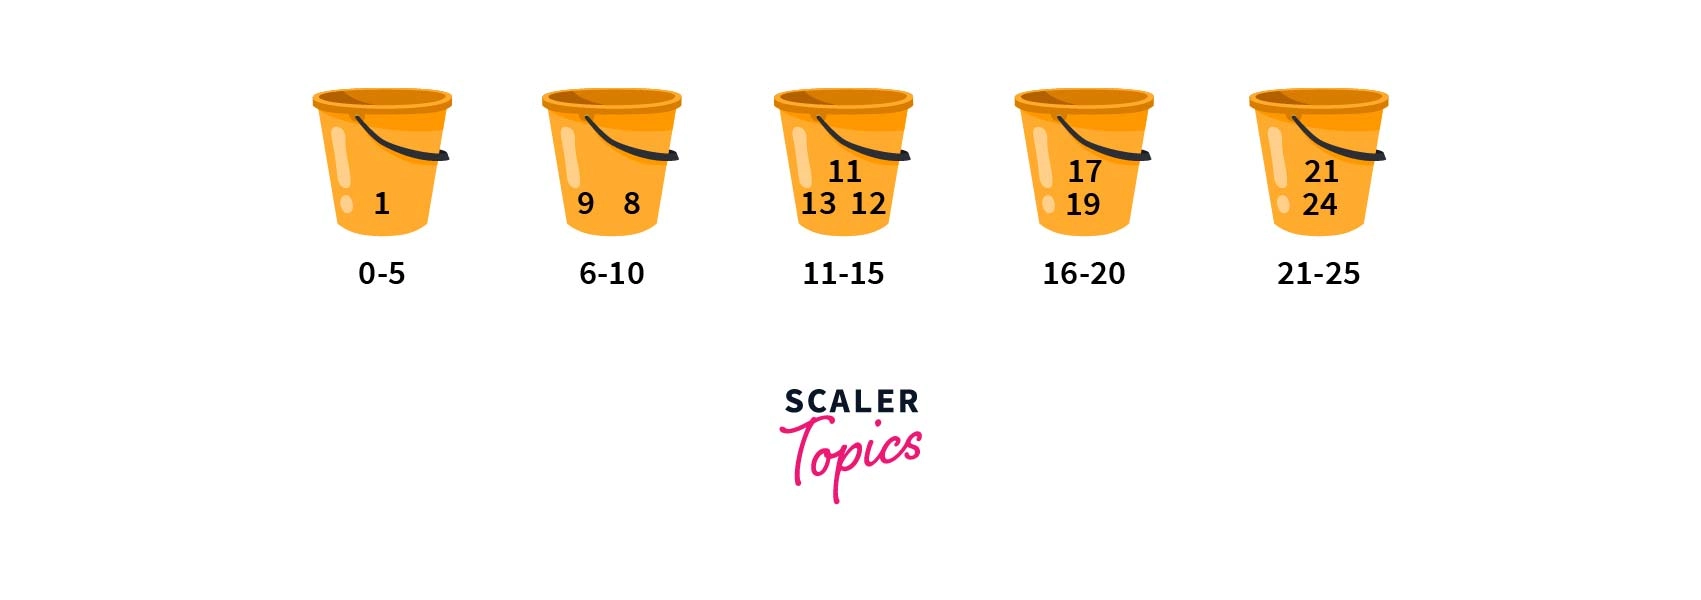 Bucket Sort with unsorted array